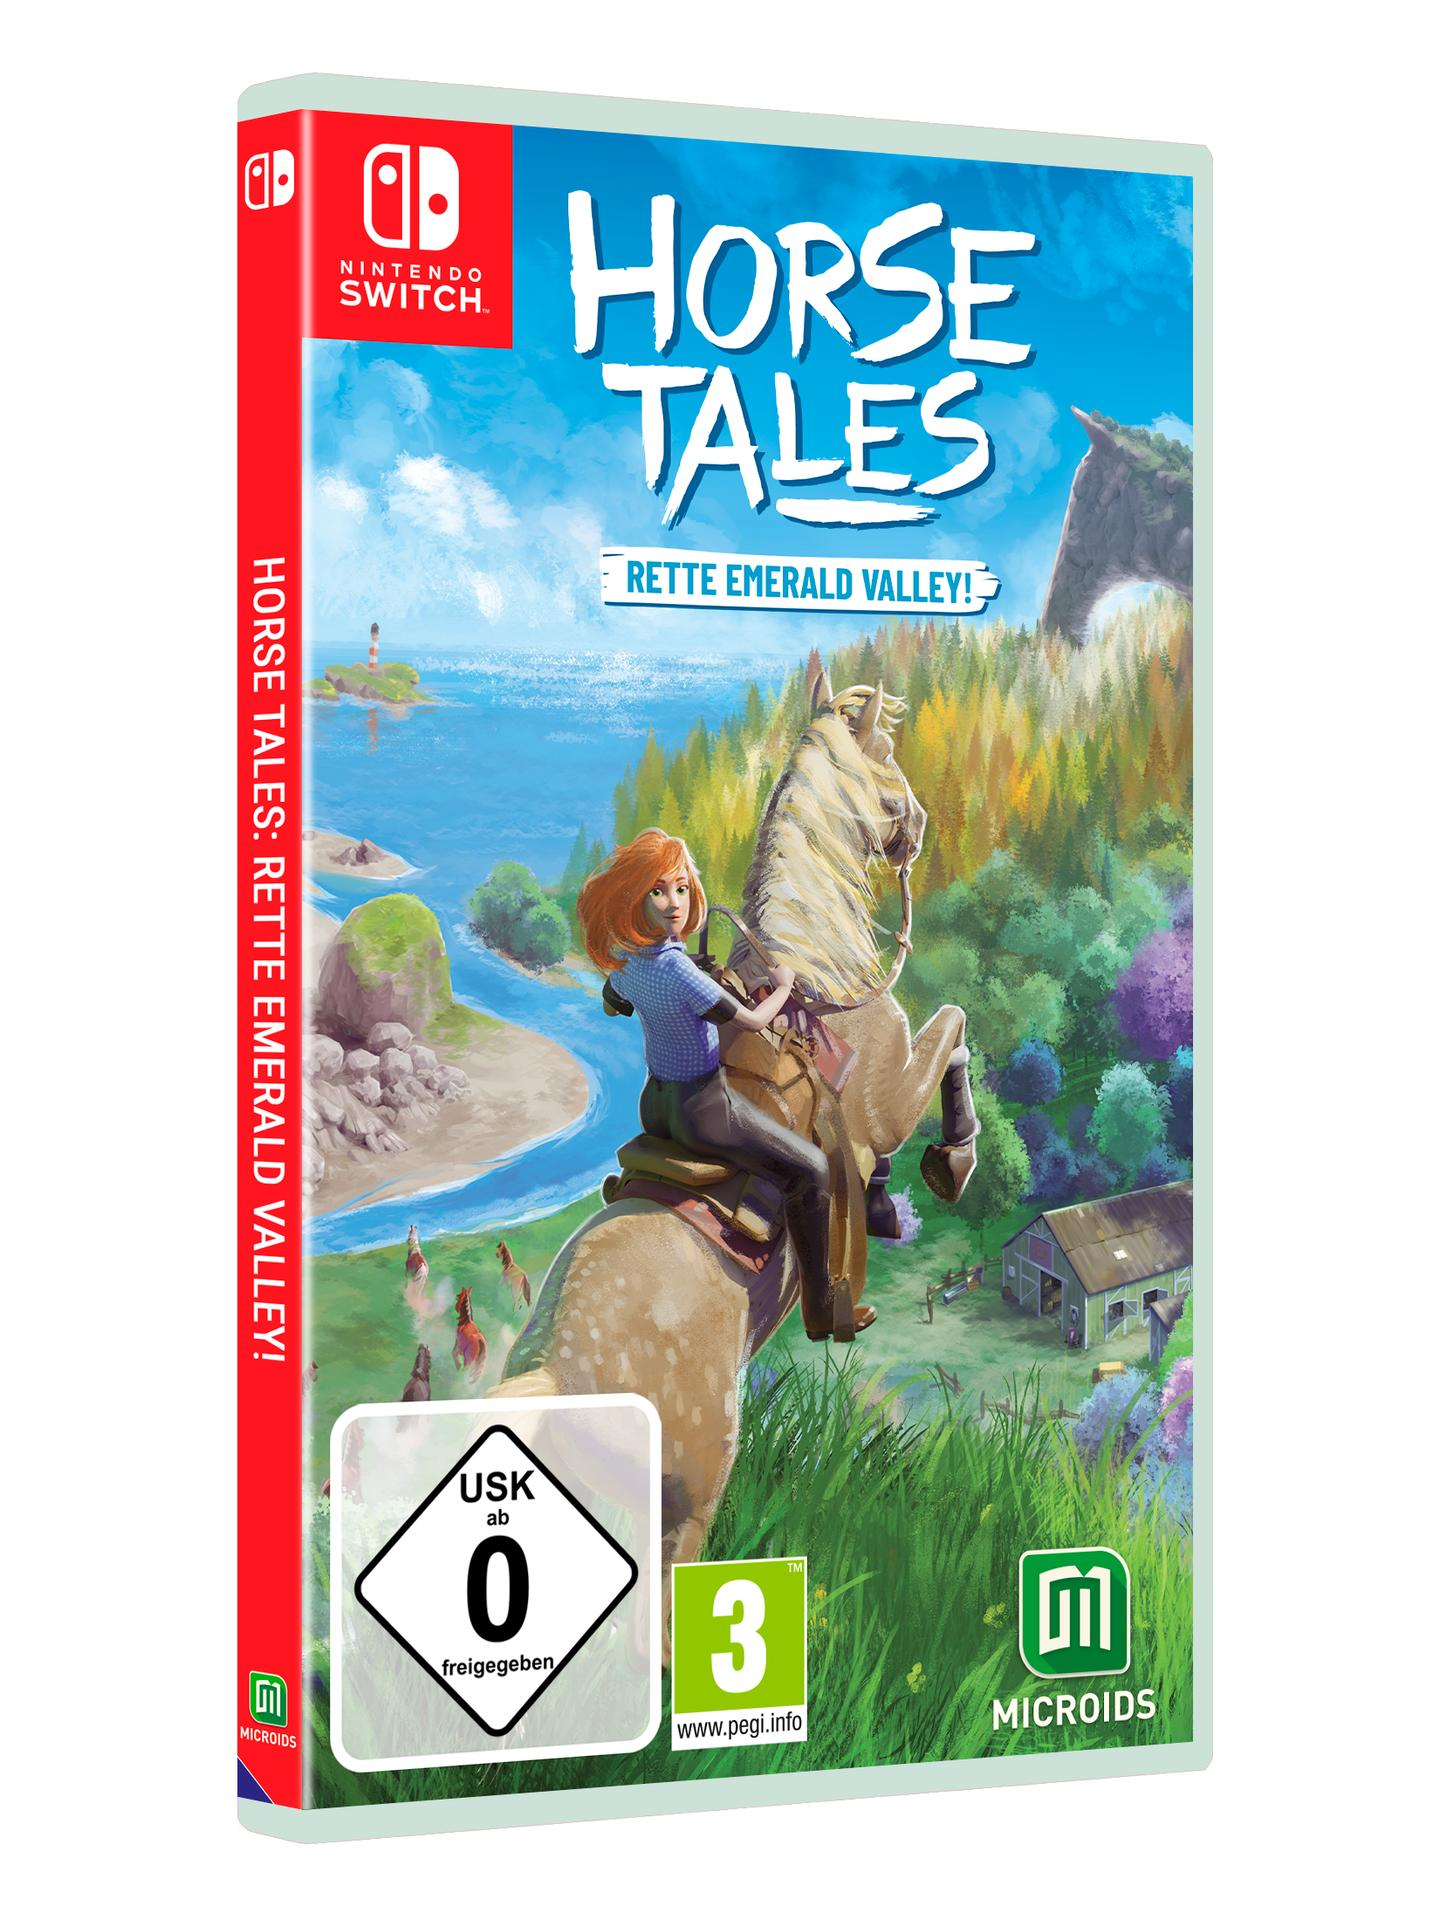 Horse Tales: Rette Switch] Valley! Emerald [Nintendo Edition - - Limited